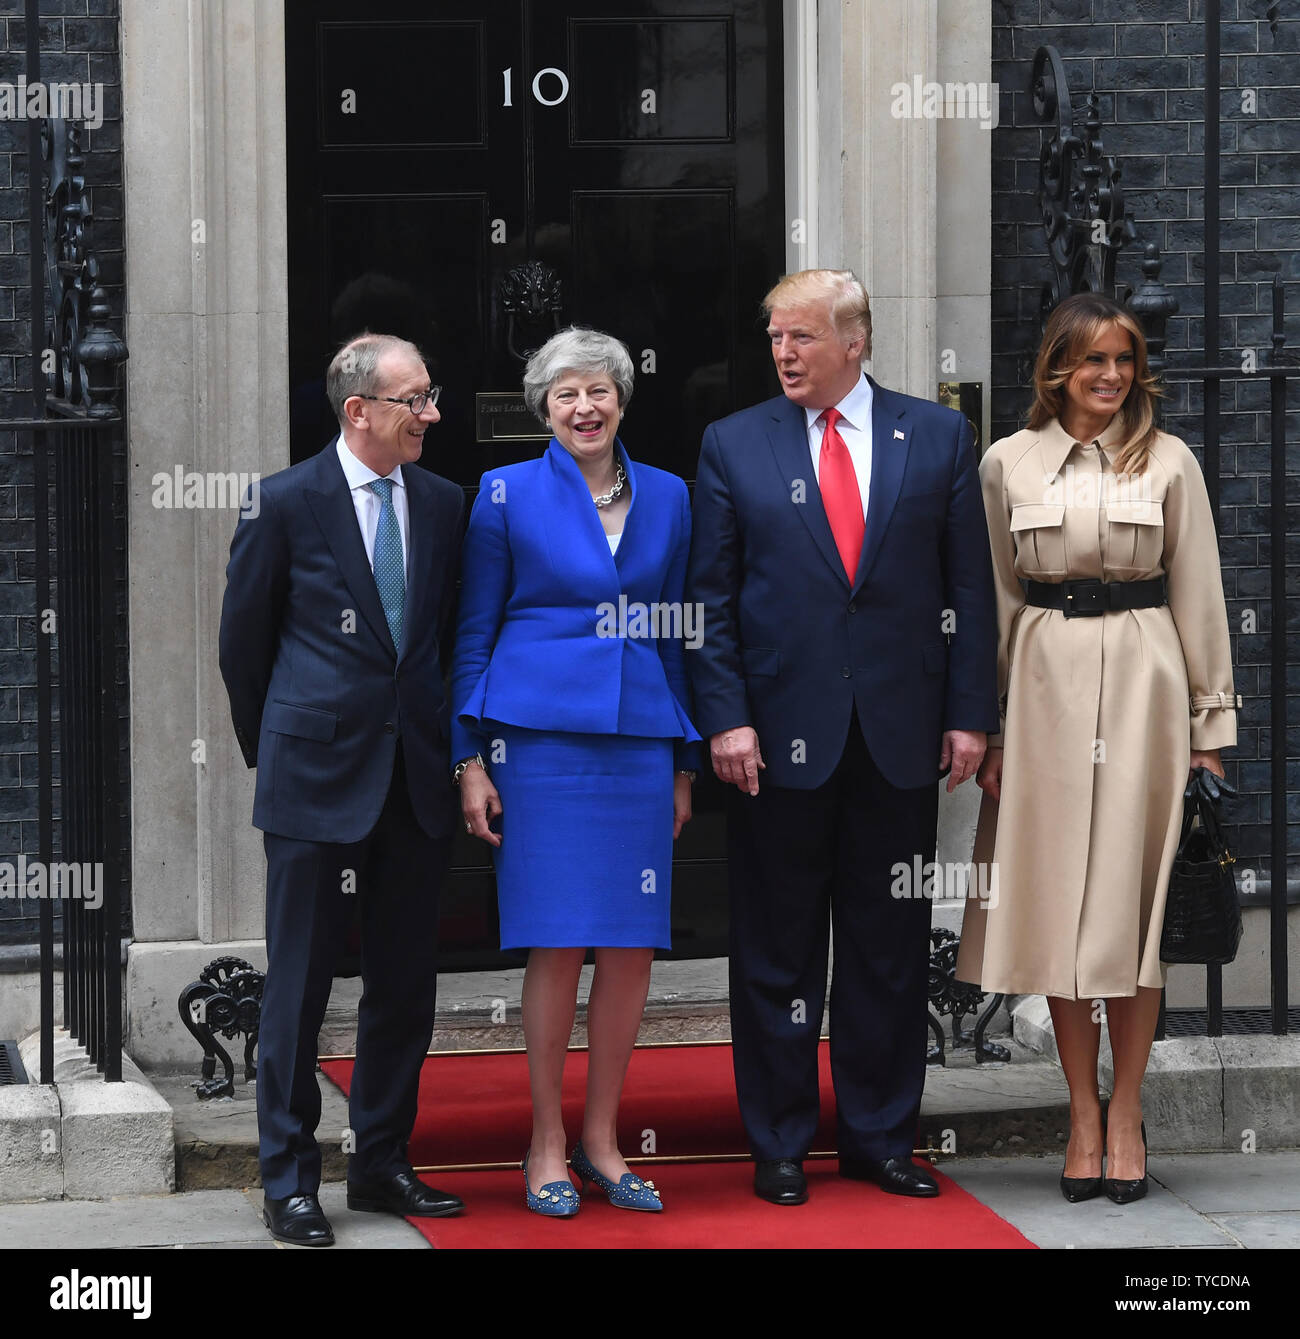 American President Donald Trump and wife Melania Trump pose with British  Prime Minister Theresa May and husband Philip John May at No. 10 Downing  Street during Trump's state visit in London on